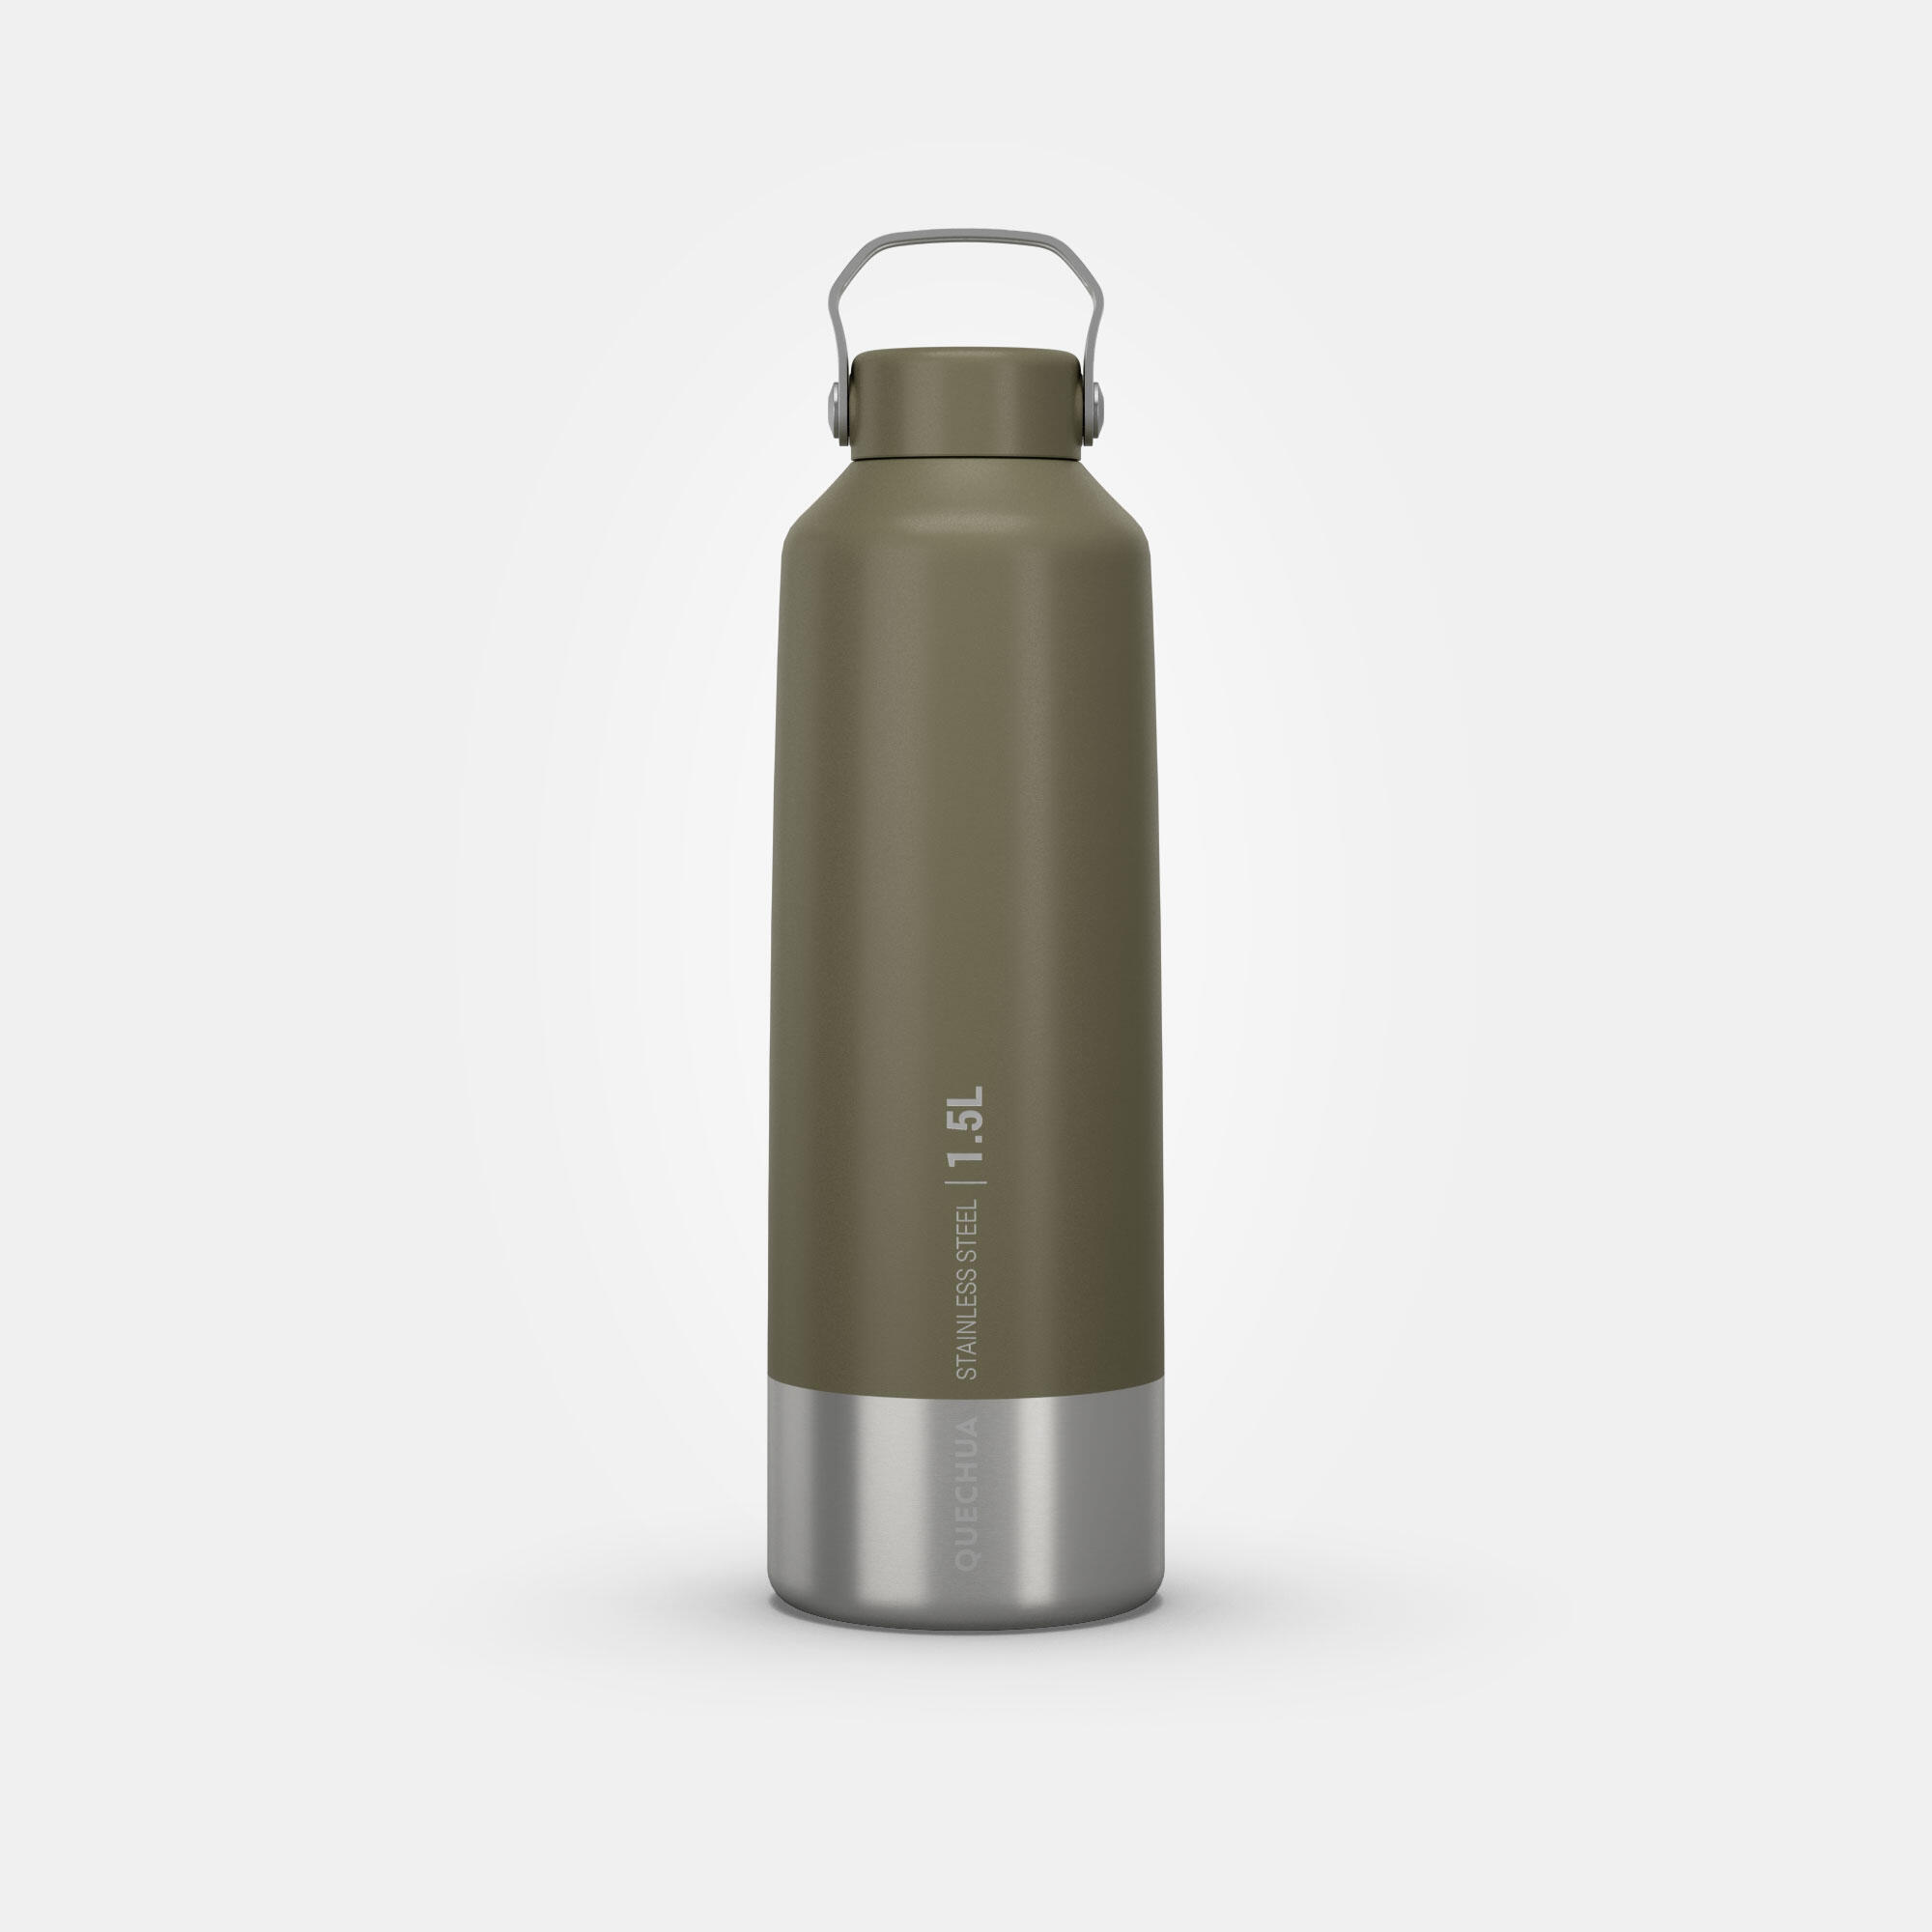 1.5 L stainless steel flask with screw cap for hiking - Khaki 10/10